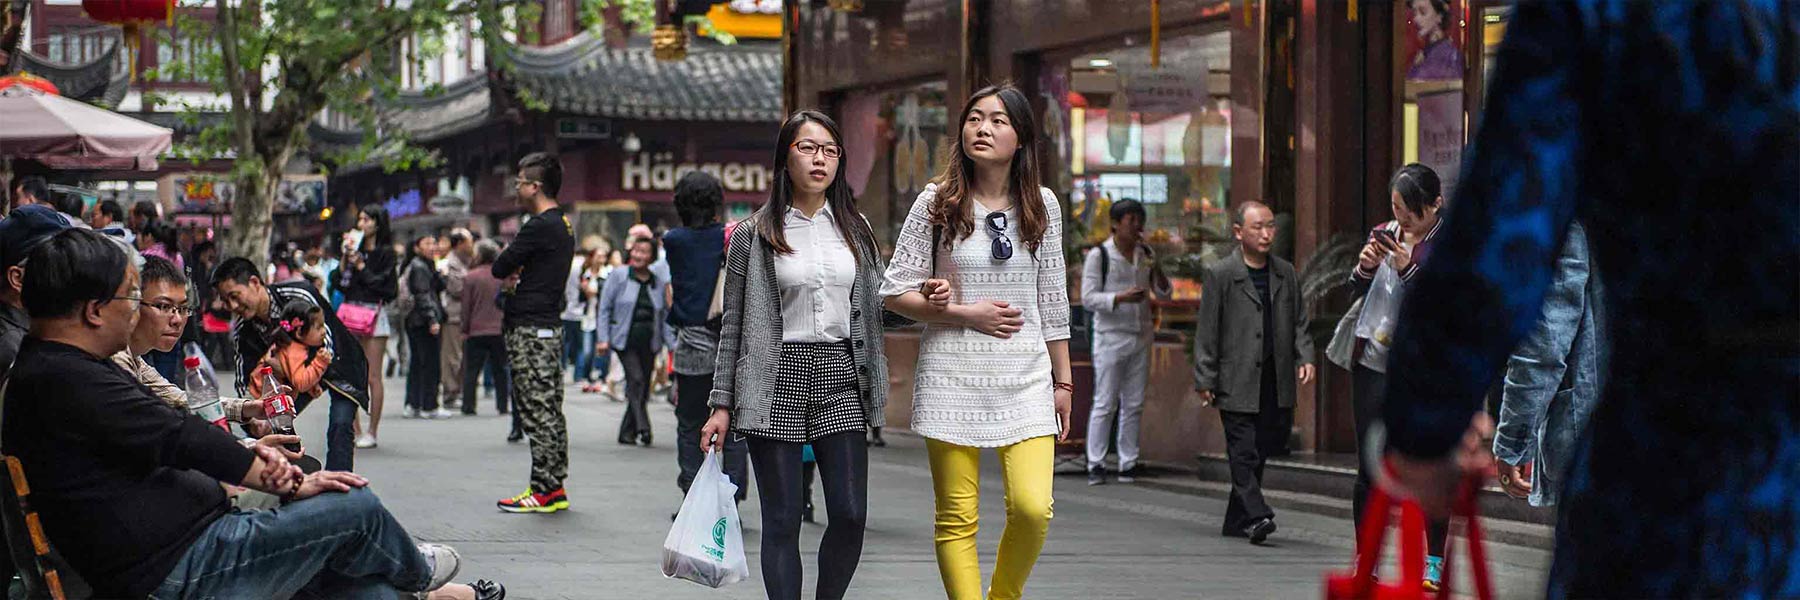 Two people link arms as they walk down the street in China.